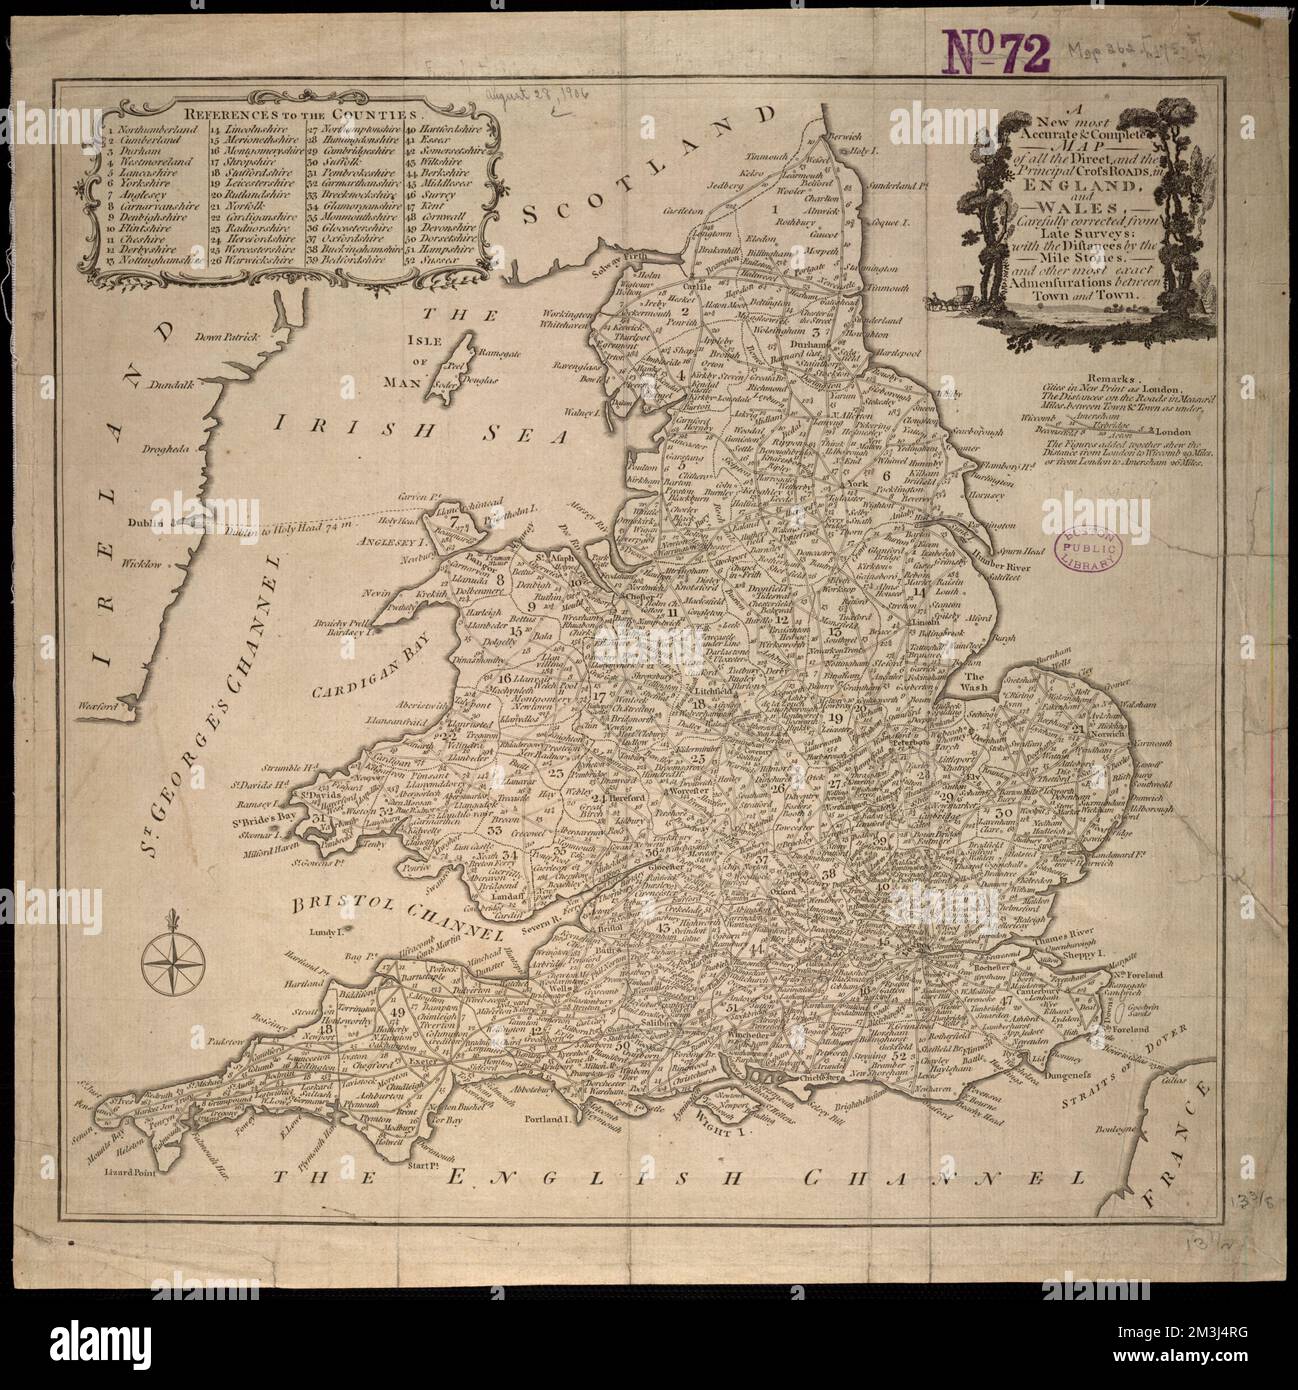 A New Most Accurate Complete Map Of All The Direct And The Principal Crossroads In England And Wales Carefully Corrected From Late Surveys With The Distances By The Mile Stones And Other Most Exact Admensurations Between Town And Town England Maps Early Works To 1800 Wales Maps Early Works To 1800 Norman B Leventhal Map Center Collection 2M3J4RG 